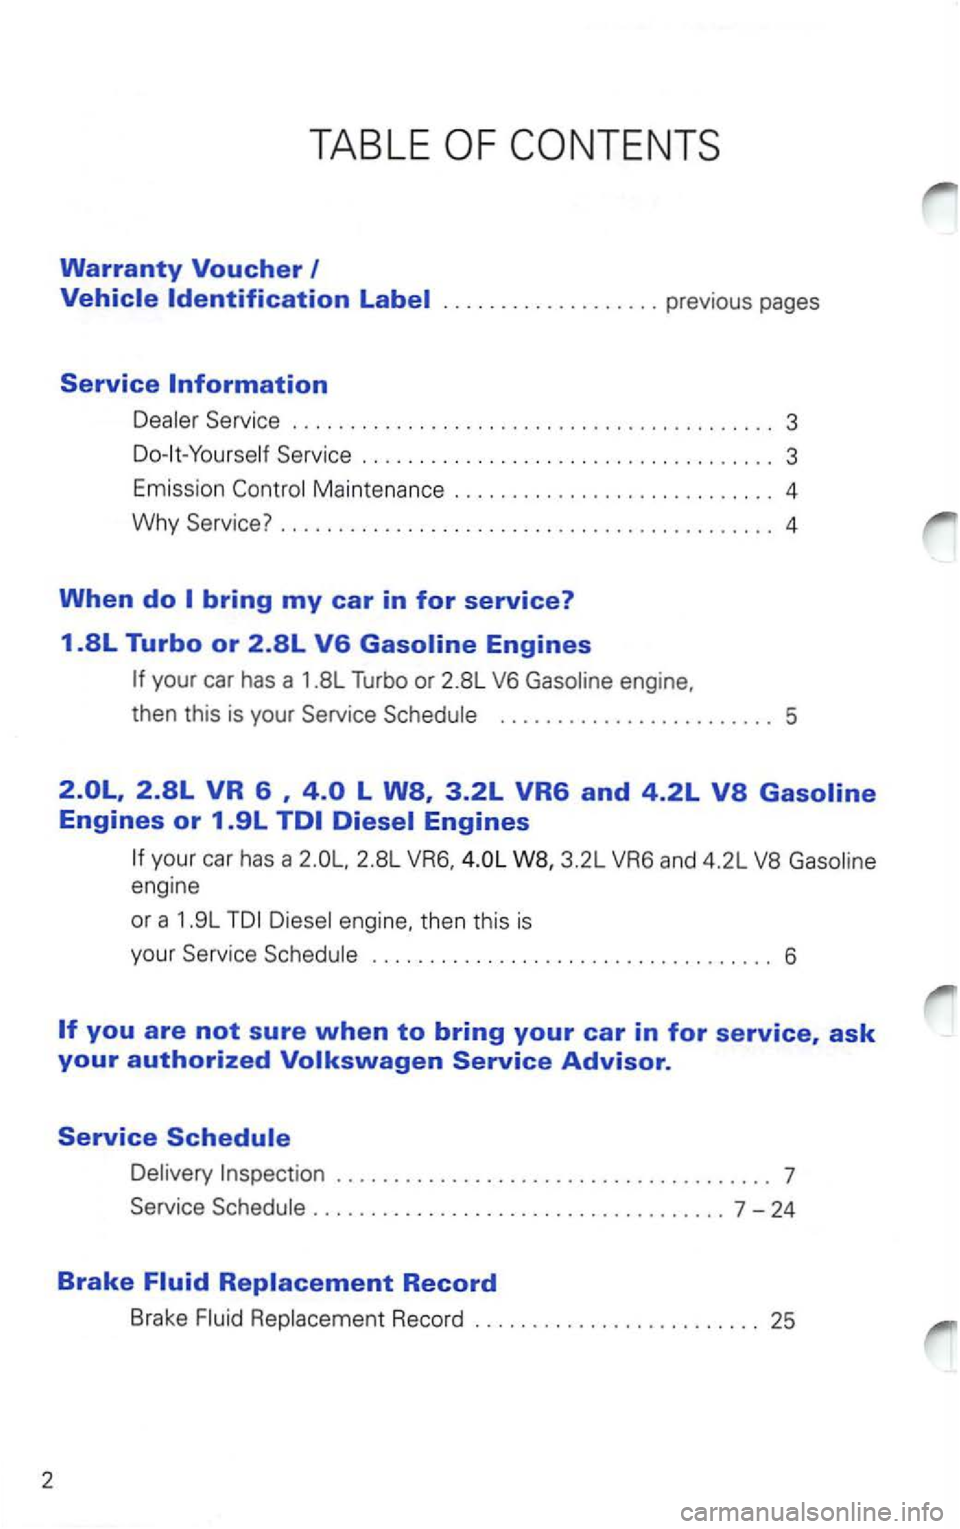 VOLKSWAGEN PASSAT 1998  Owners Manual 2 
TABLE 
Warranty Voucher 
Maintenance ............................ 4 
Why Service?  . . . . . .  . . . .  . . .  . . . . . . .  . . . .  . . . .  . .  . . . .  . .  . . . .  . .  .  4 
When do 
your